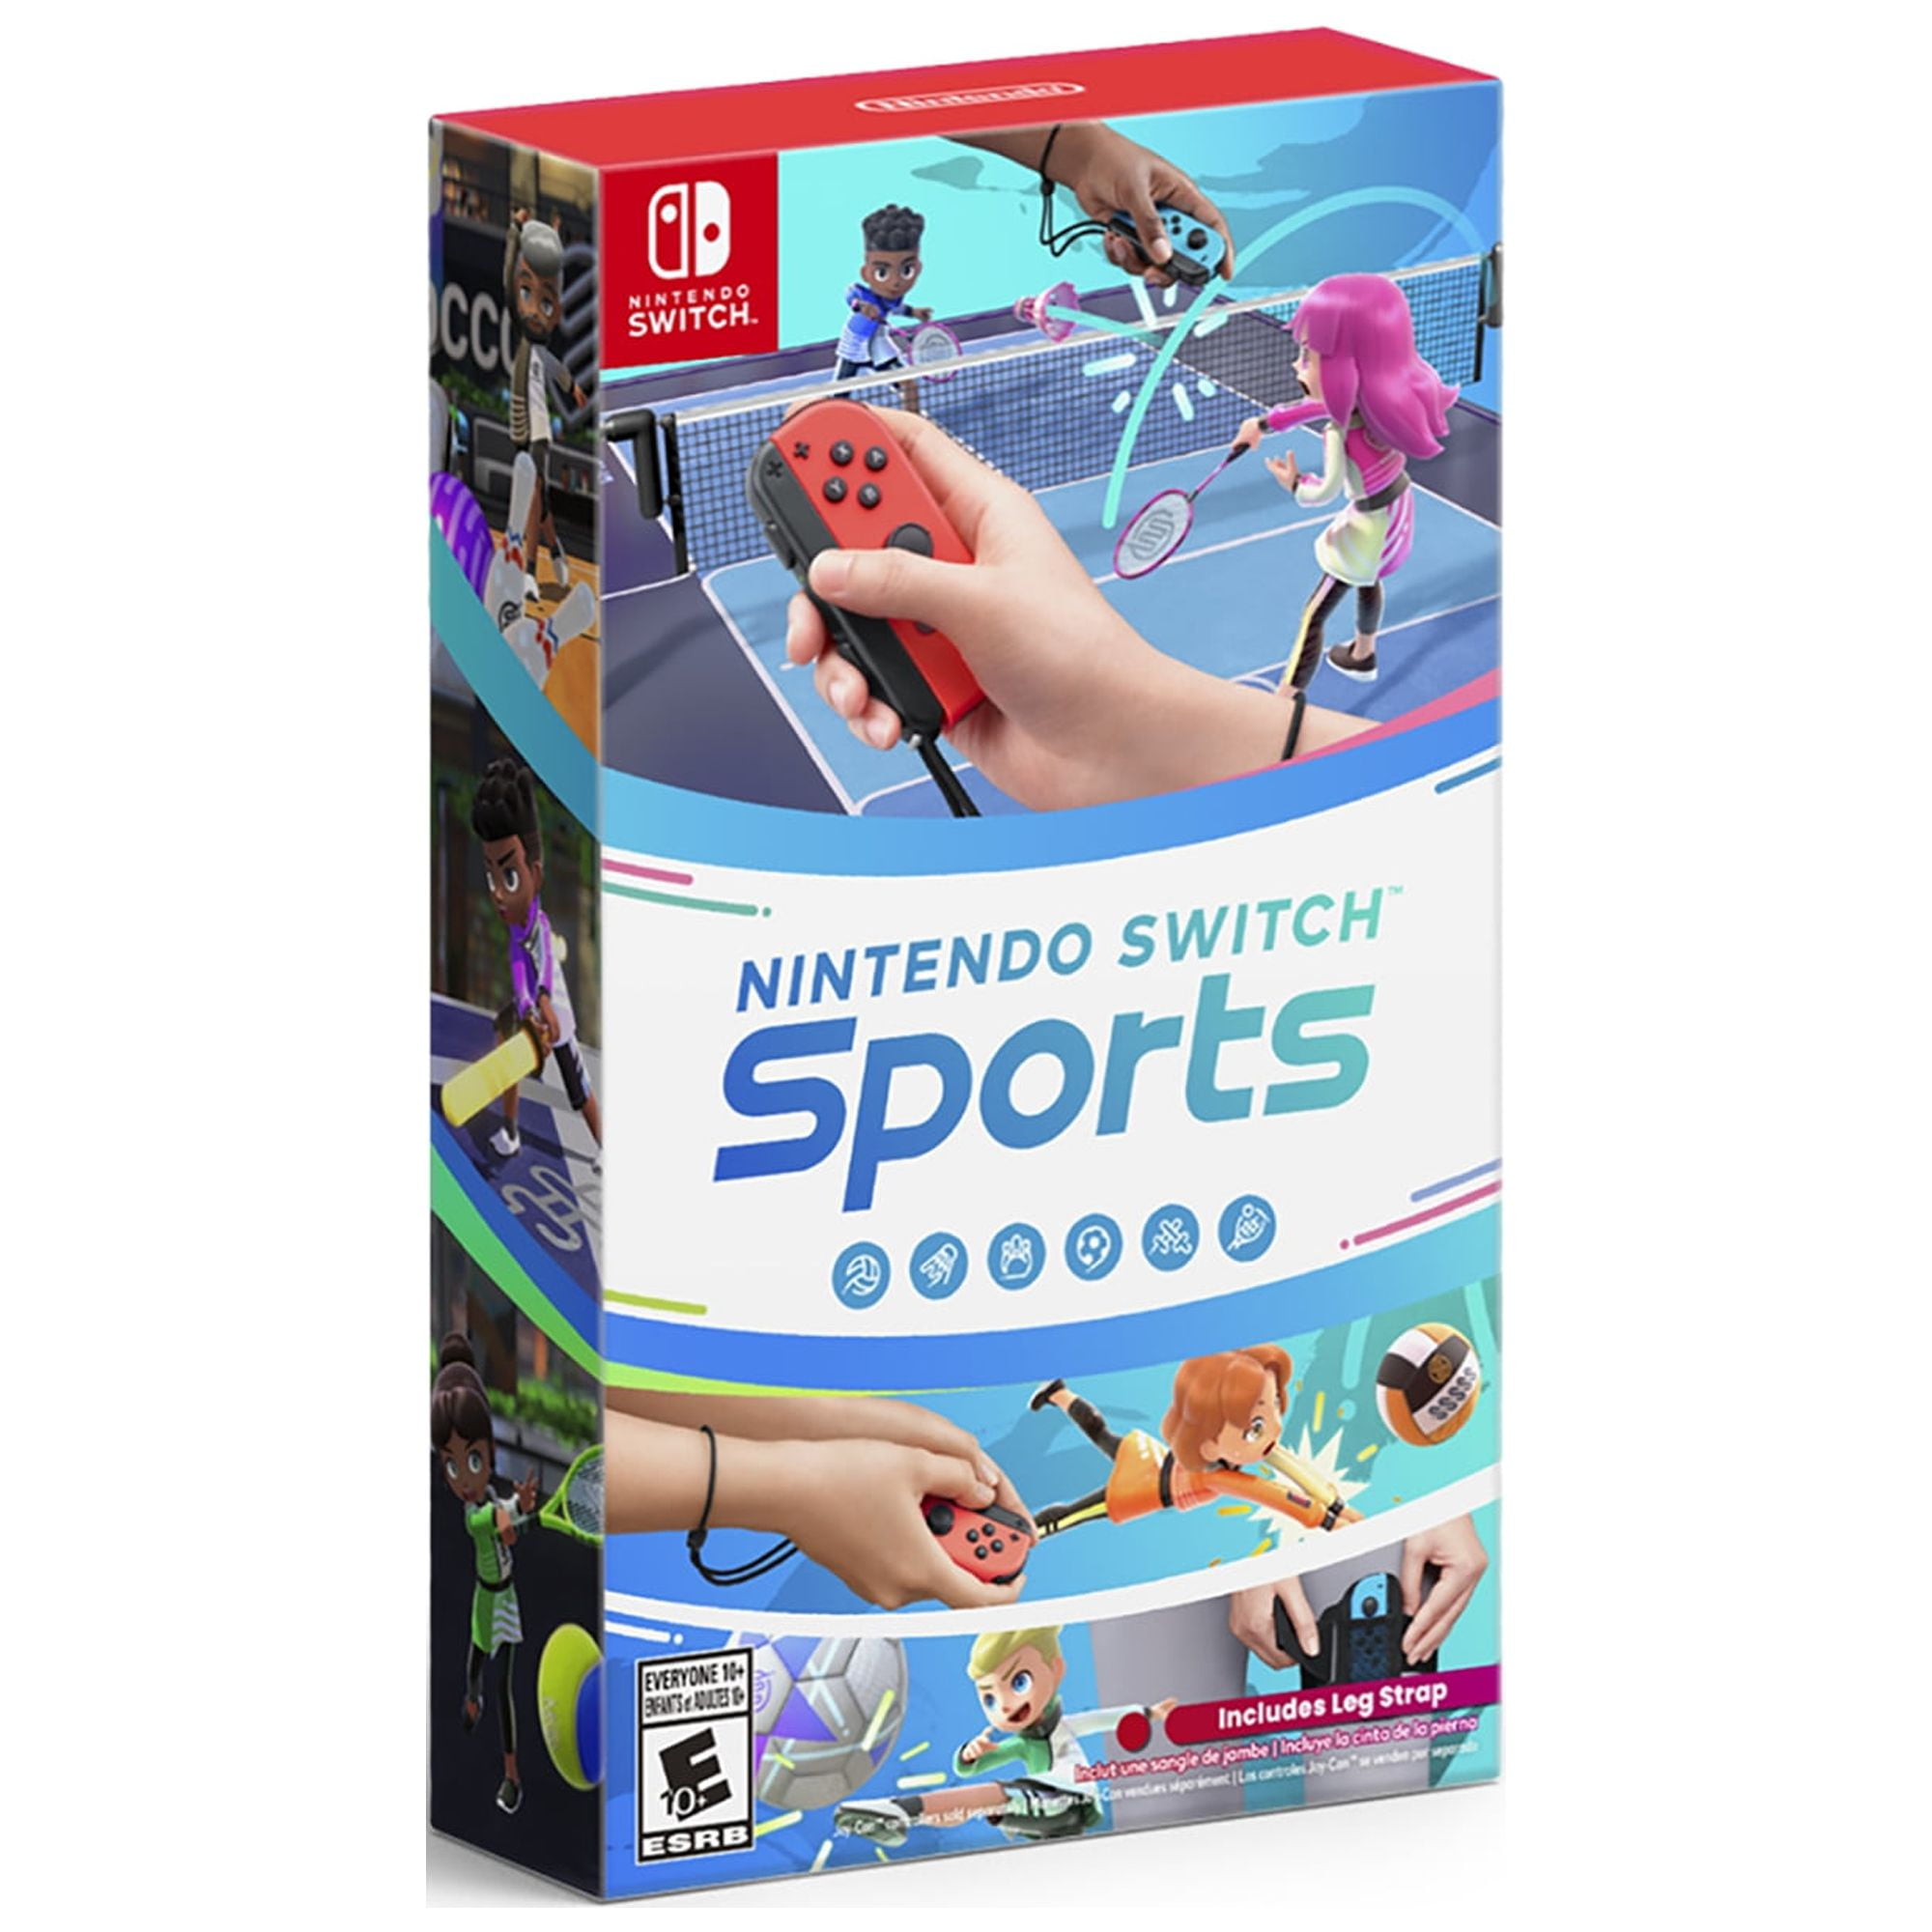 Nintendo Switch Games on Sale for $39.99 - IGN